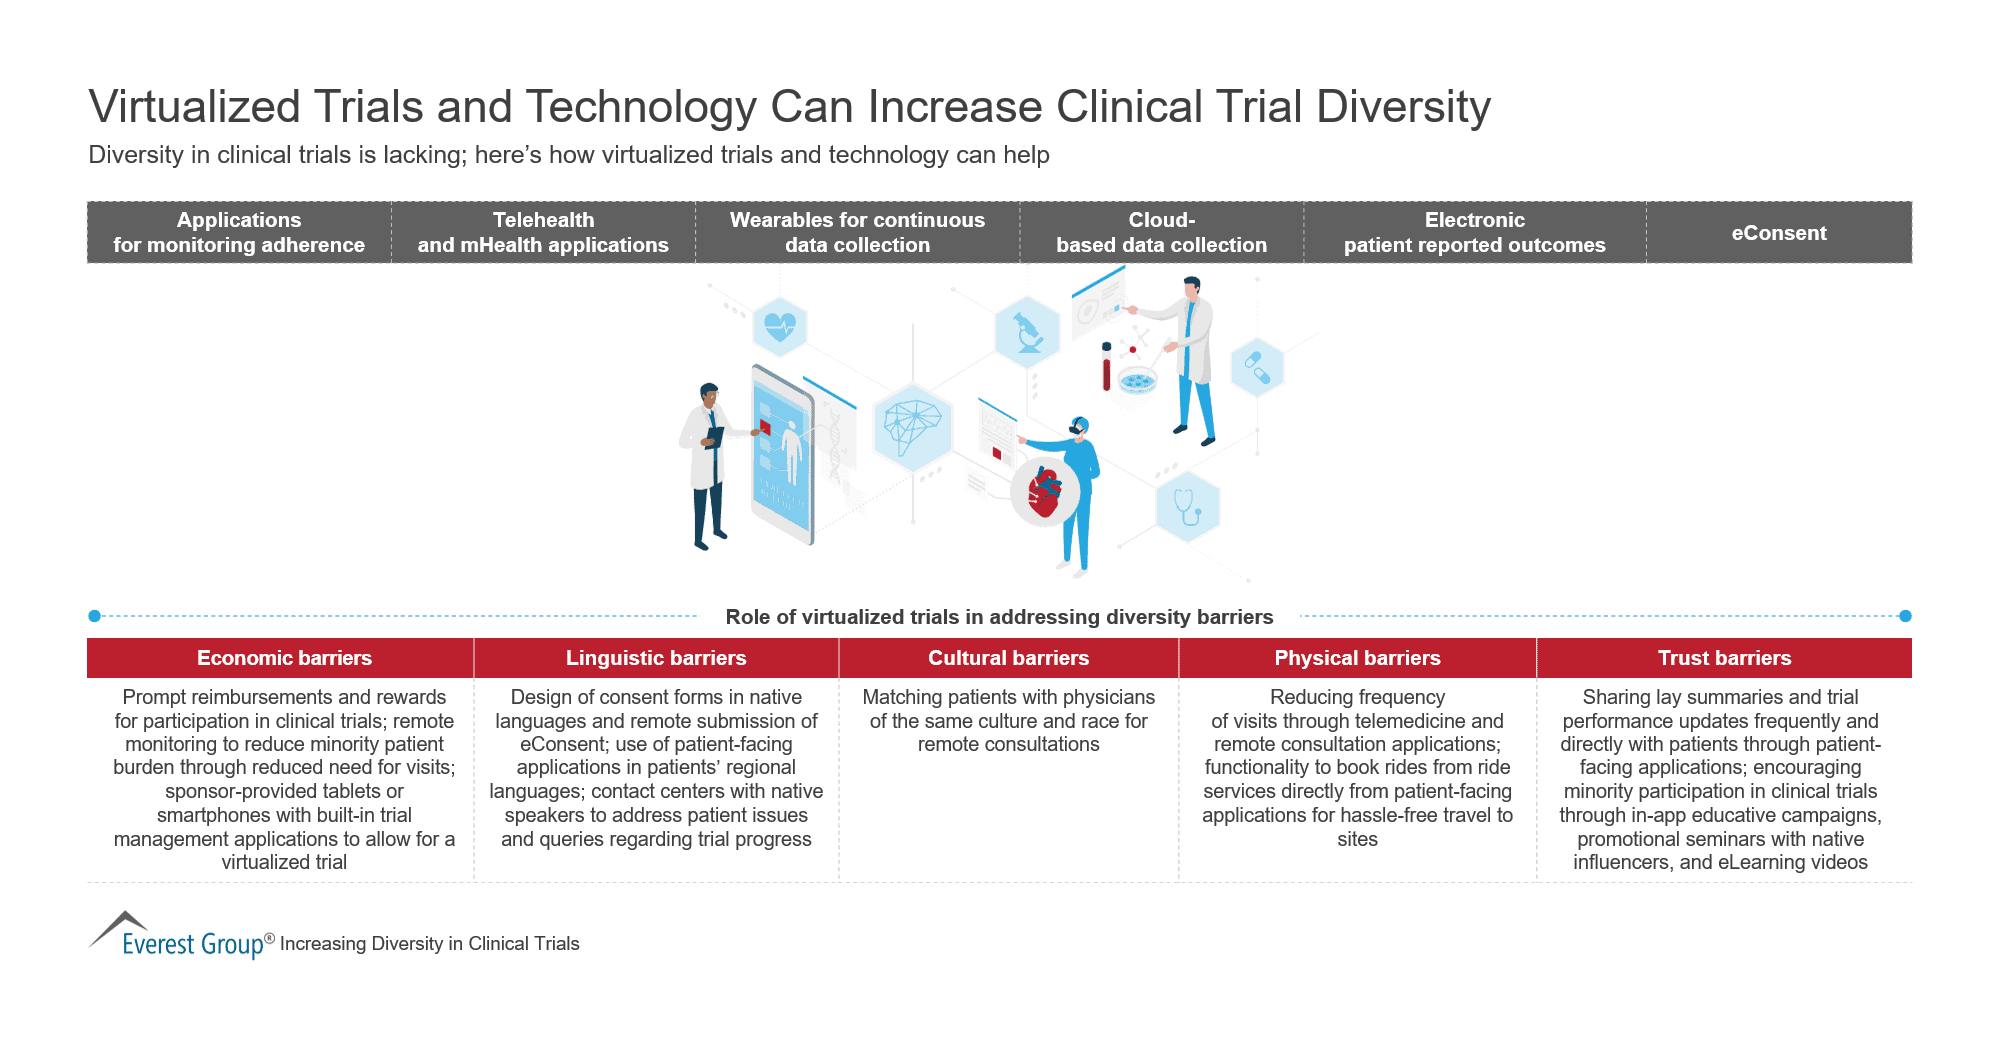 Virtualized Trials and Technology Can Increase Clinical Trial Diversity